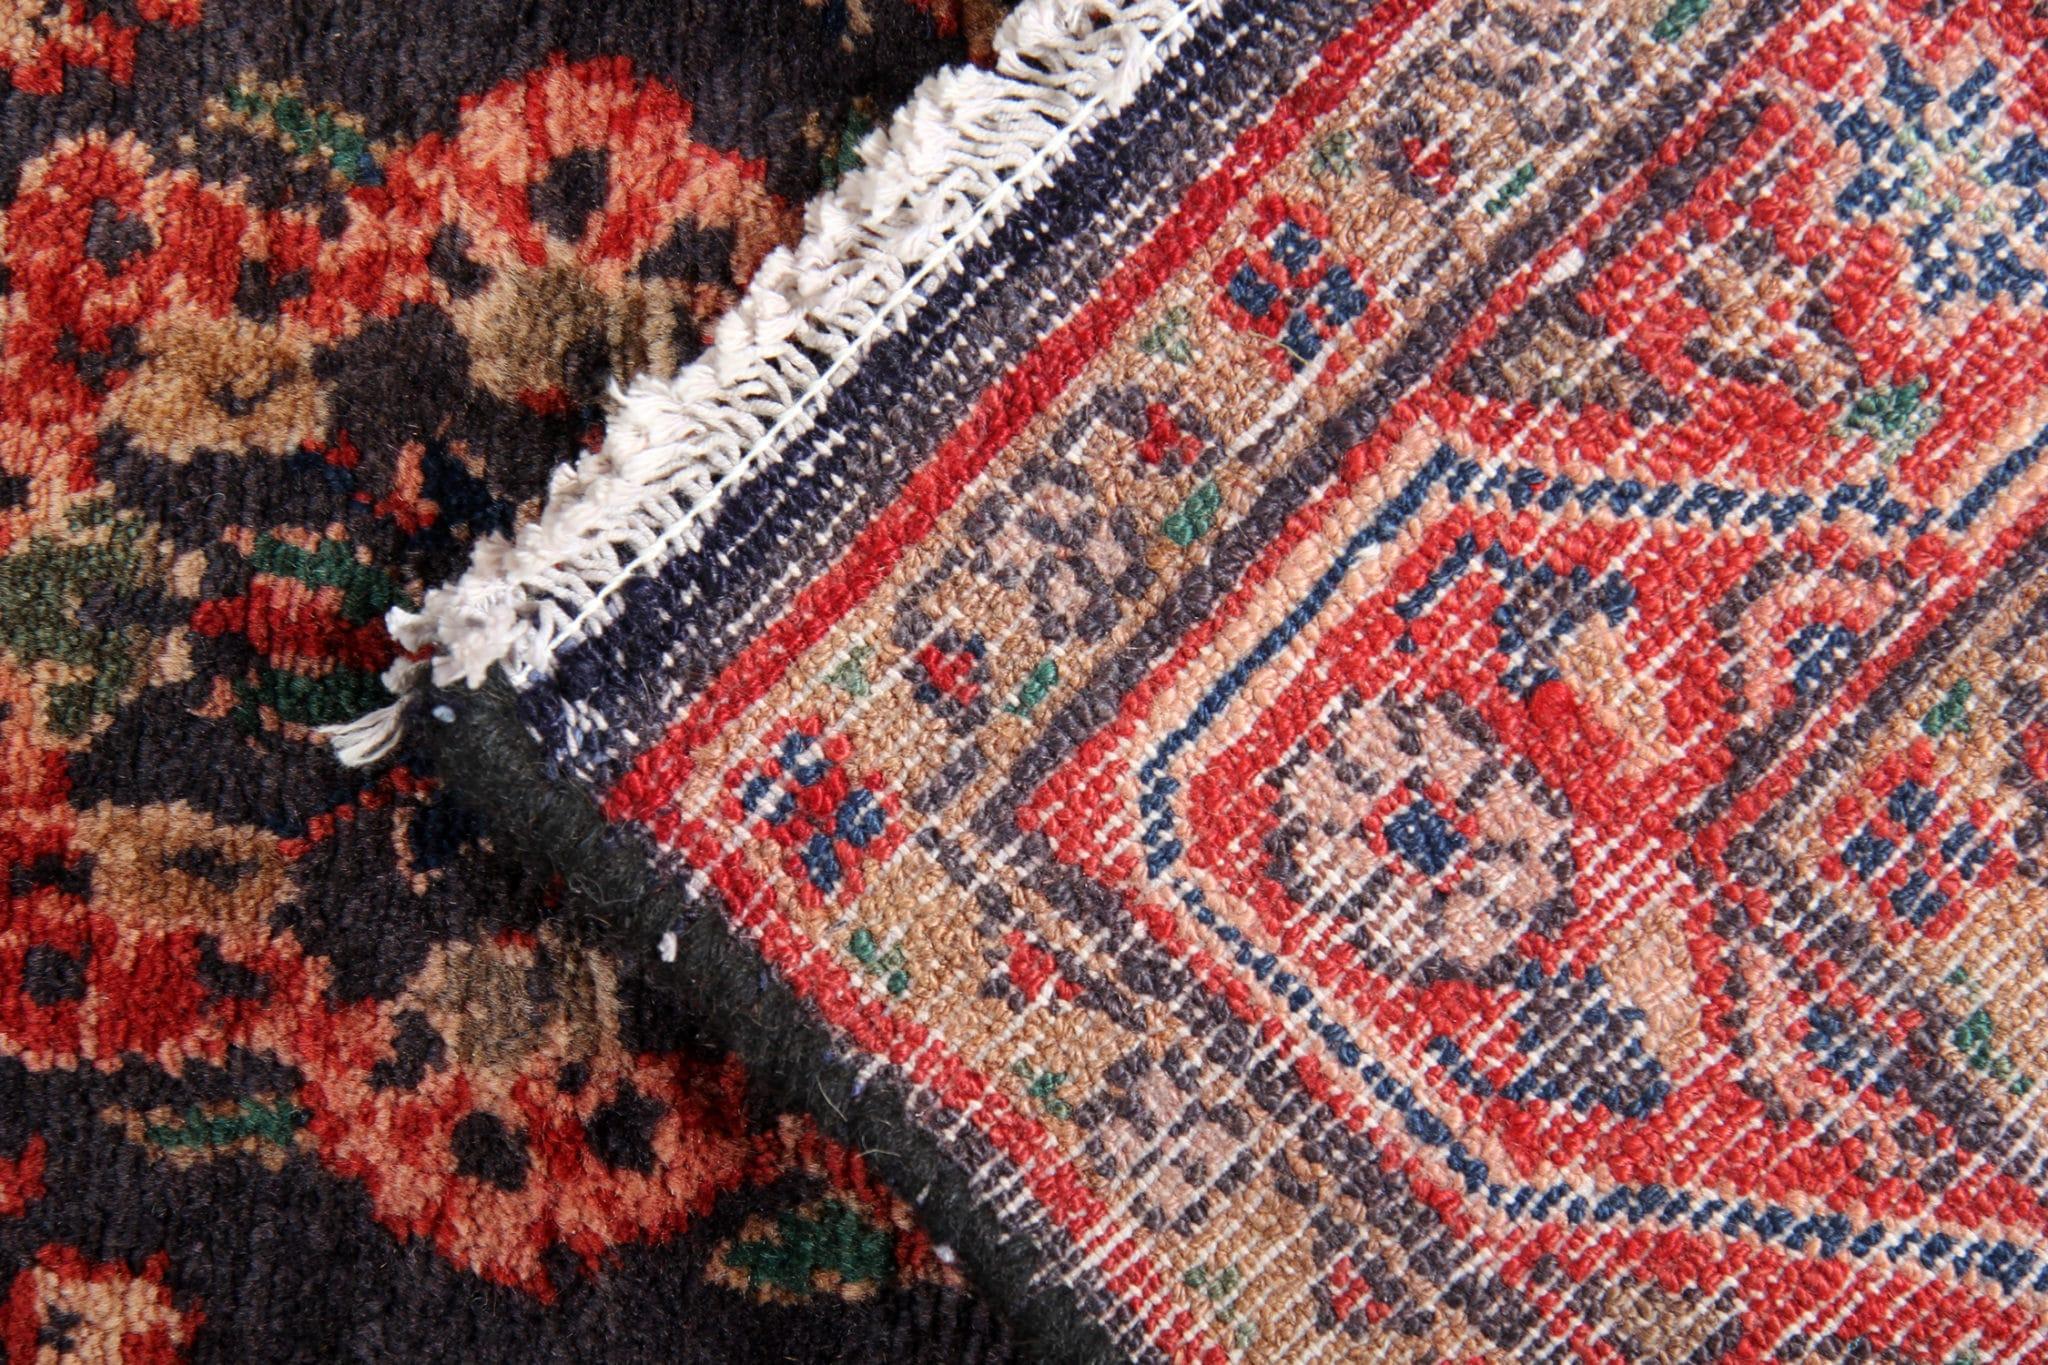 Vintage Hussein Abad Runner Rug, Deep Red Stair Runner, Wool Rug In Excellent Condition For Sale In Hampshire, GB